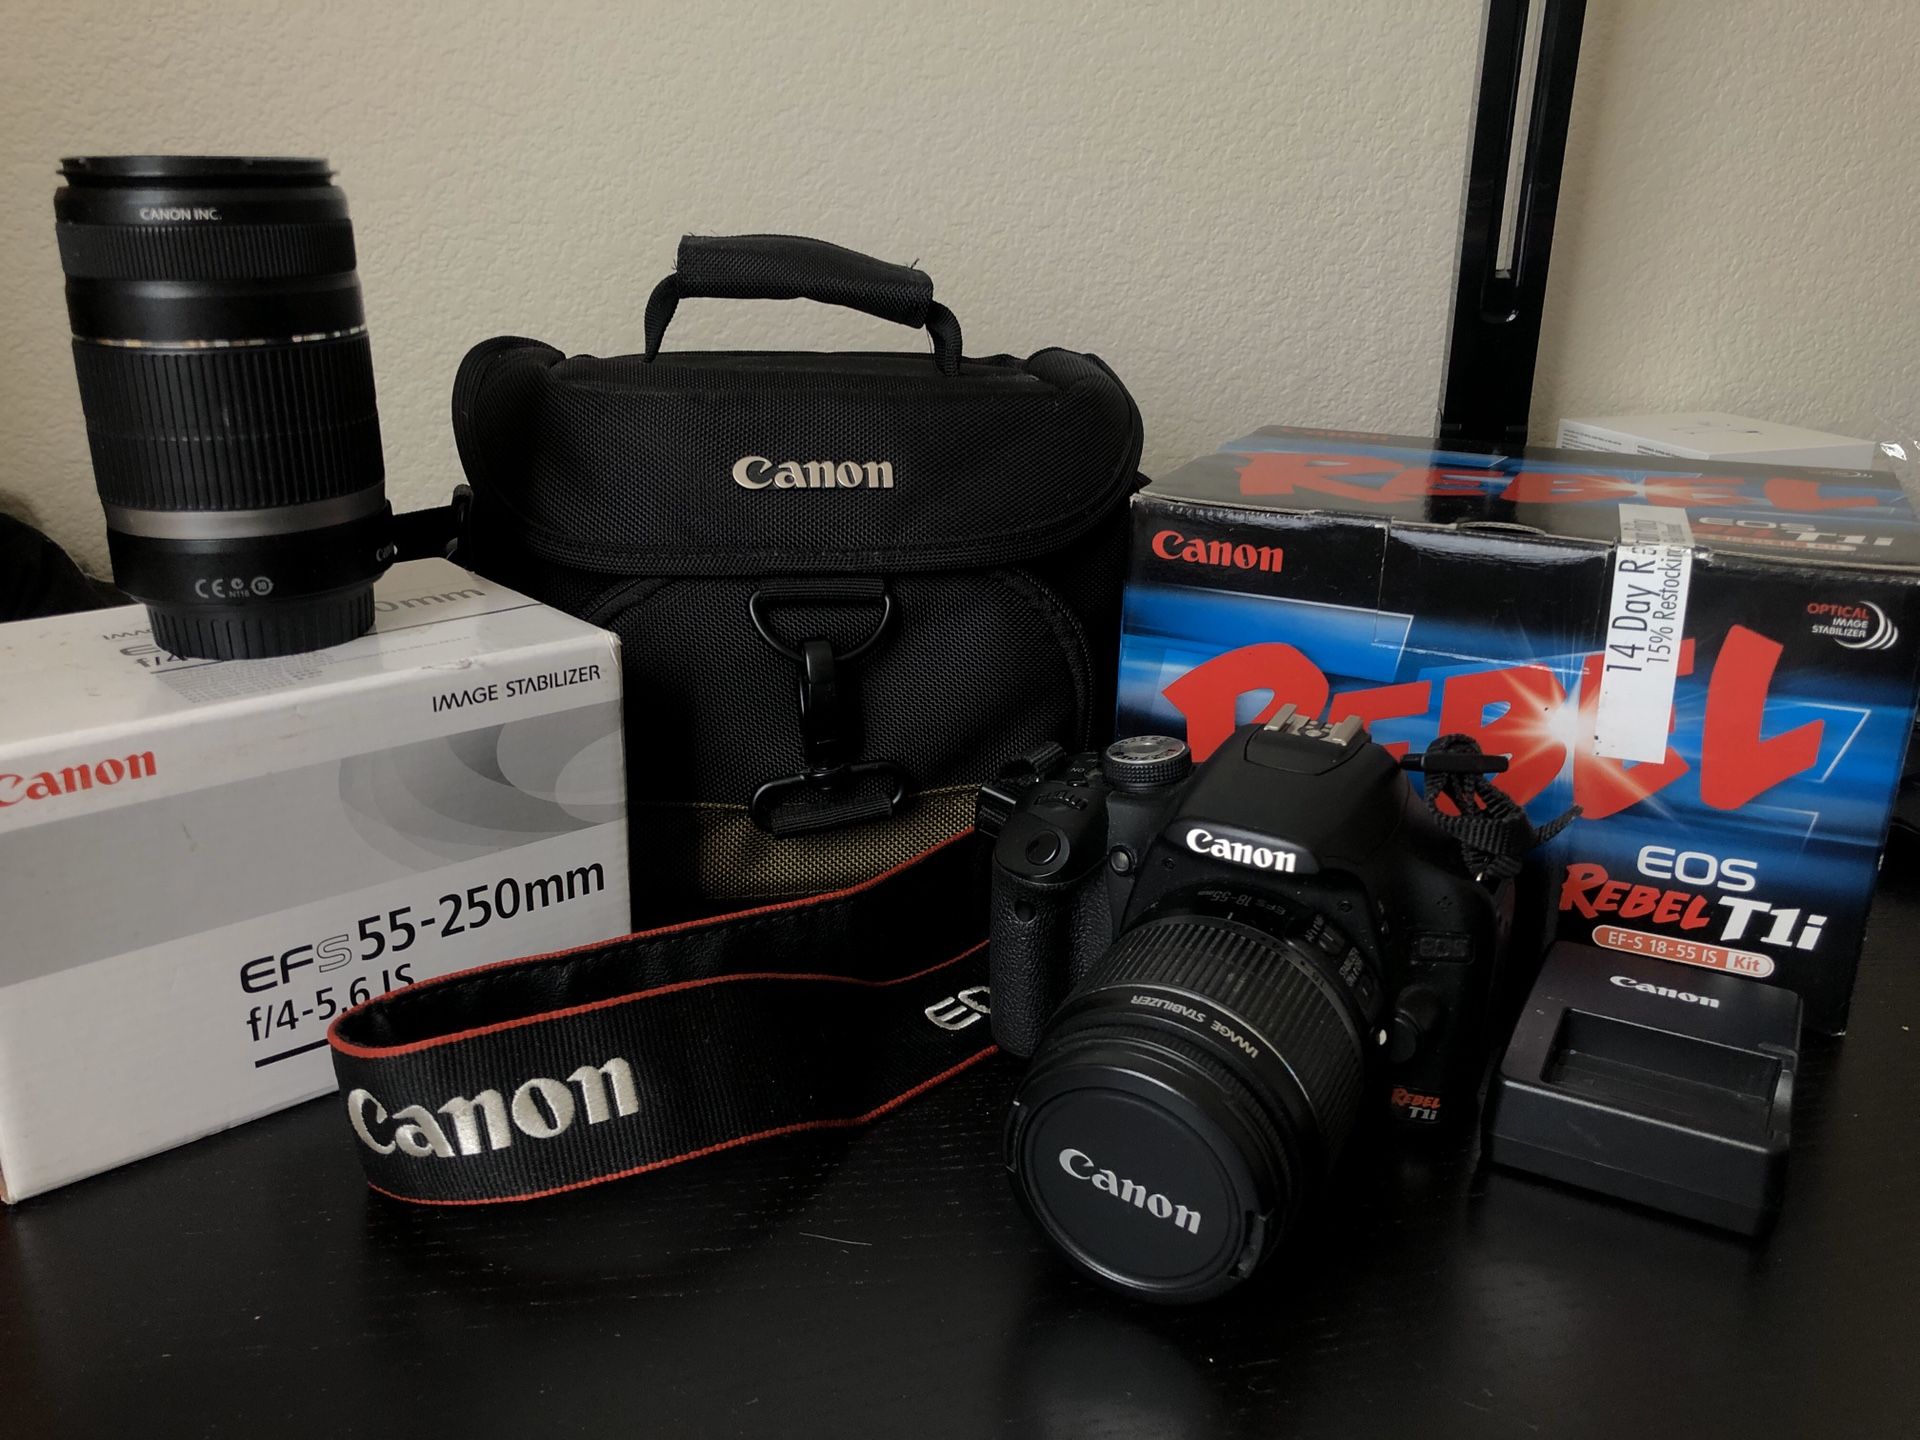 Canon EOS Rebel T1i Camera with Lens Bundle